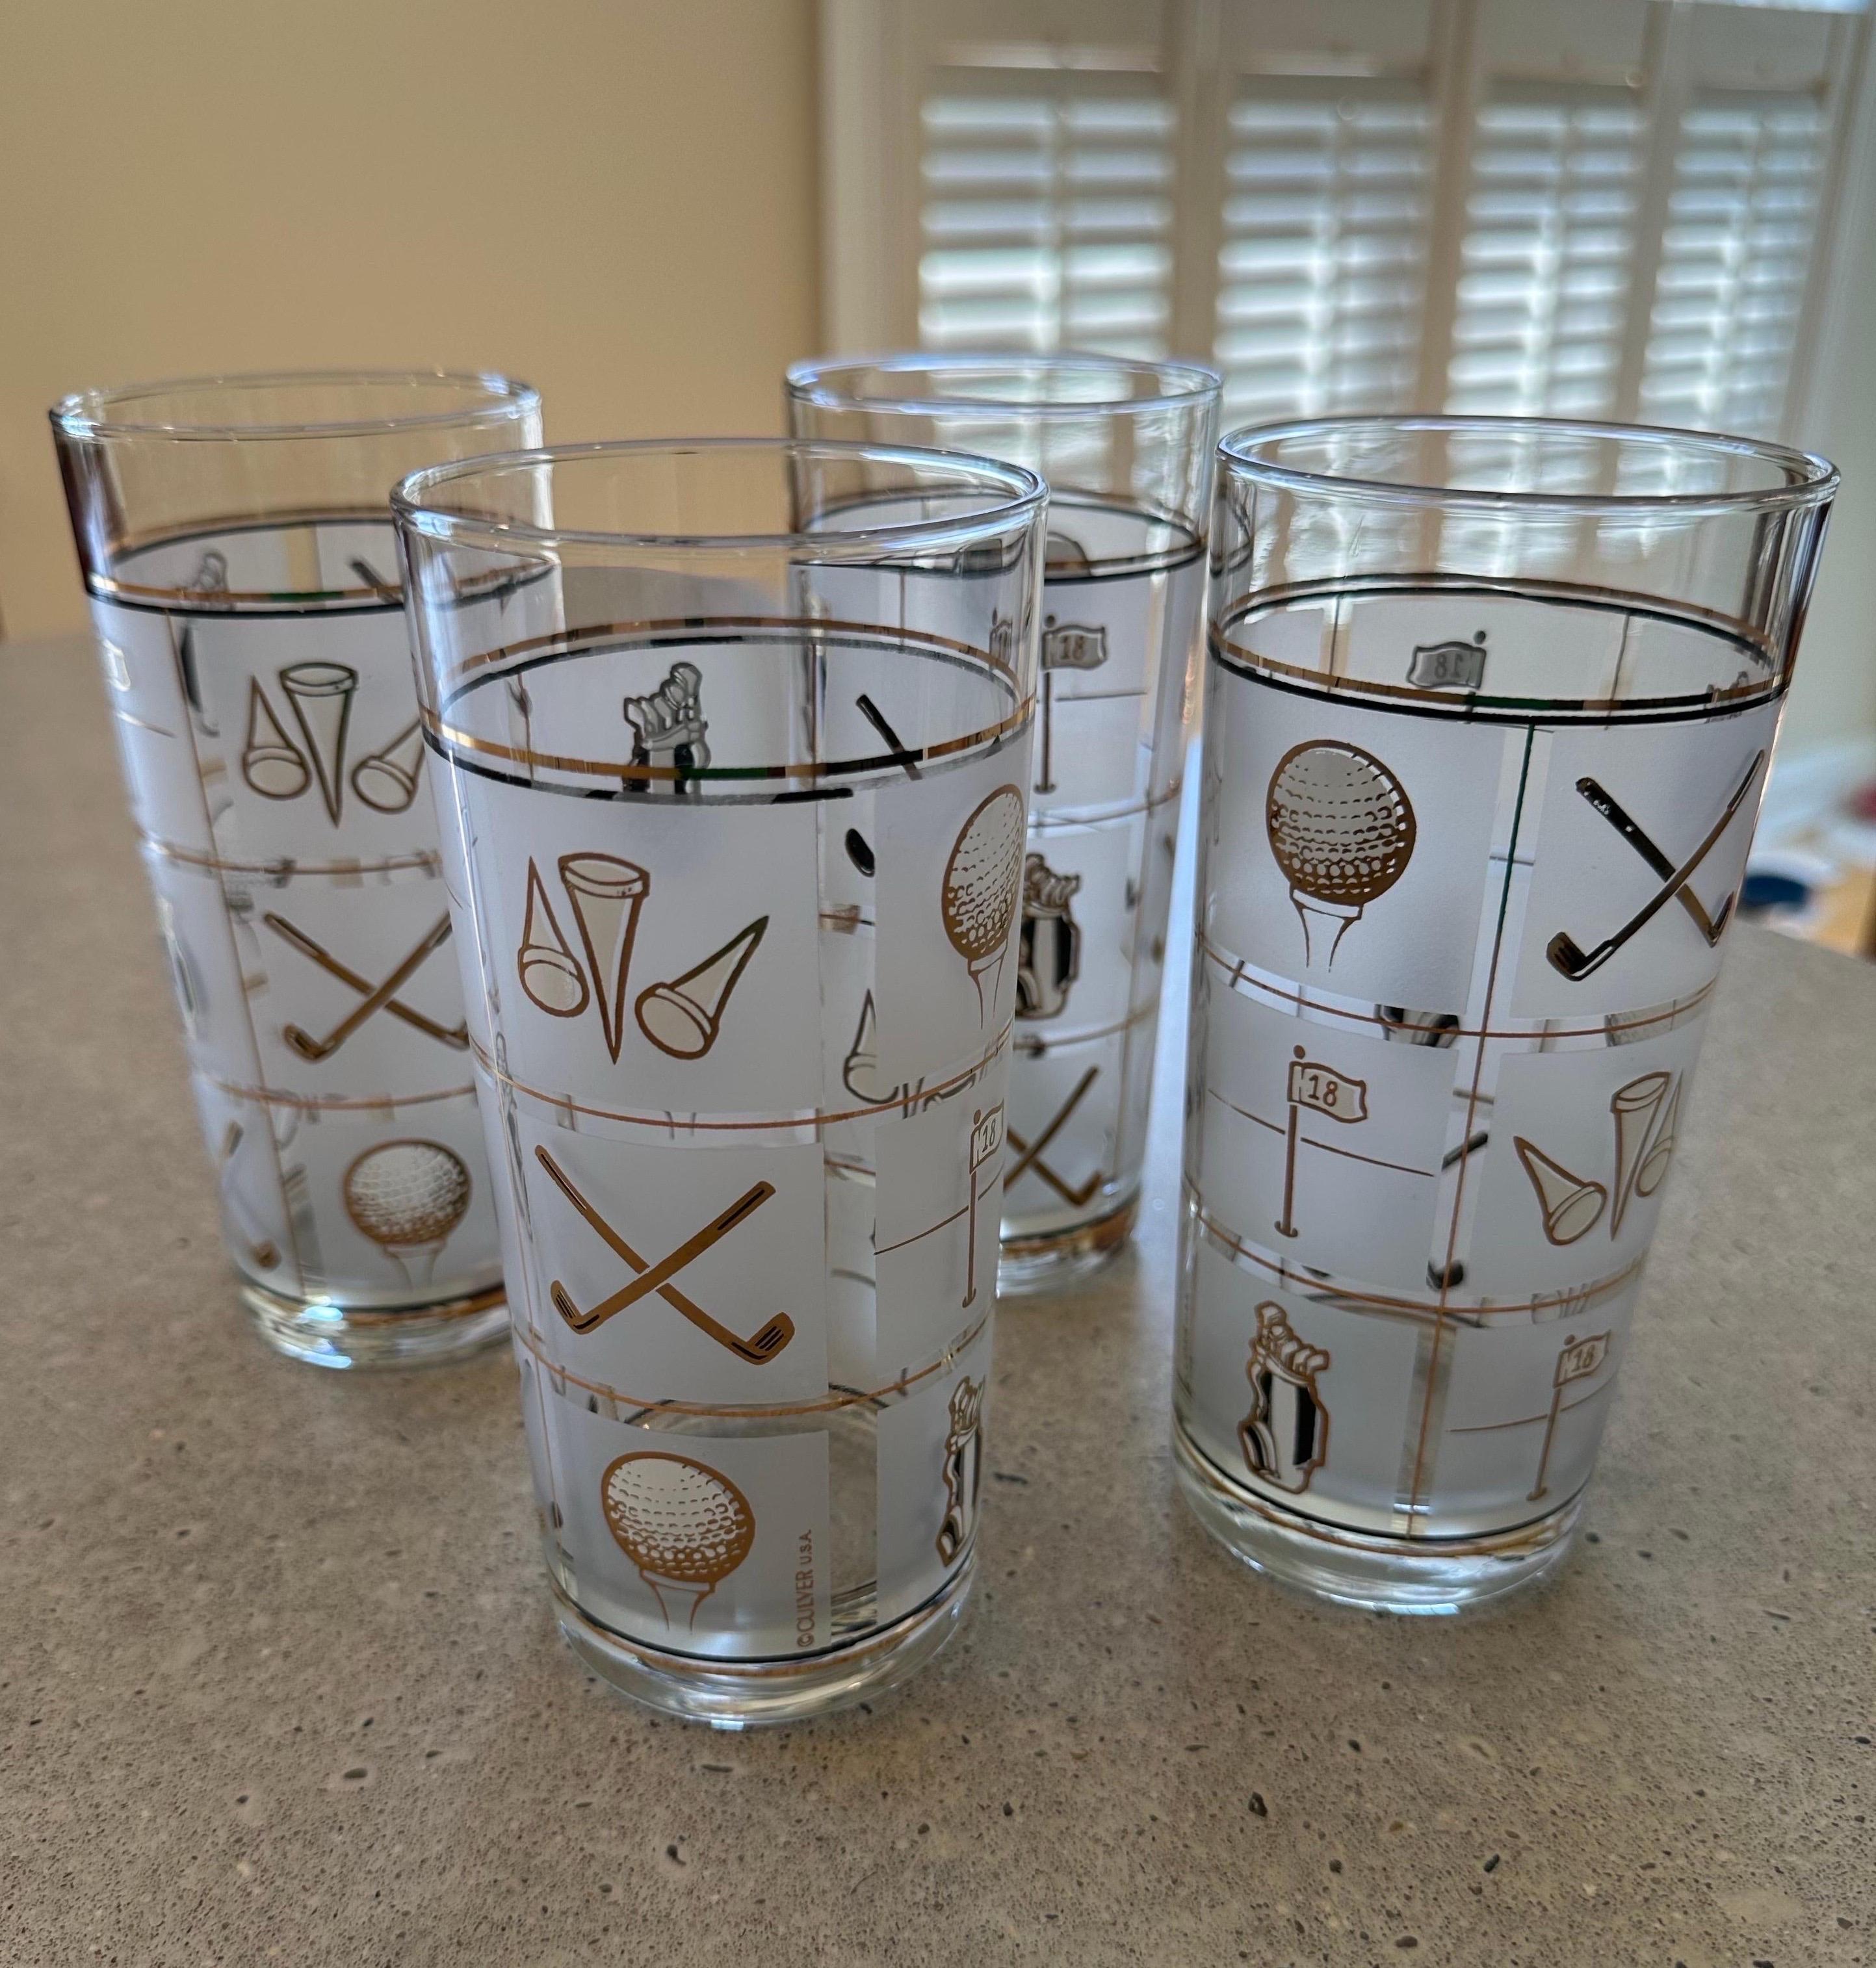 Mid-Century Modern Culver Fairway 22k Gold Decorated Glasses - 4 Rocks and 4 High Ball/Collins  For Sale